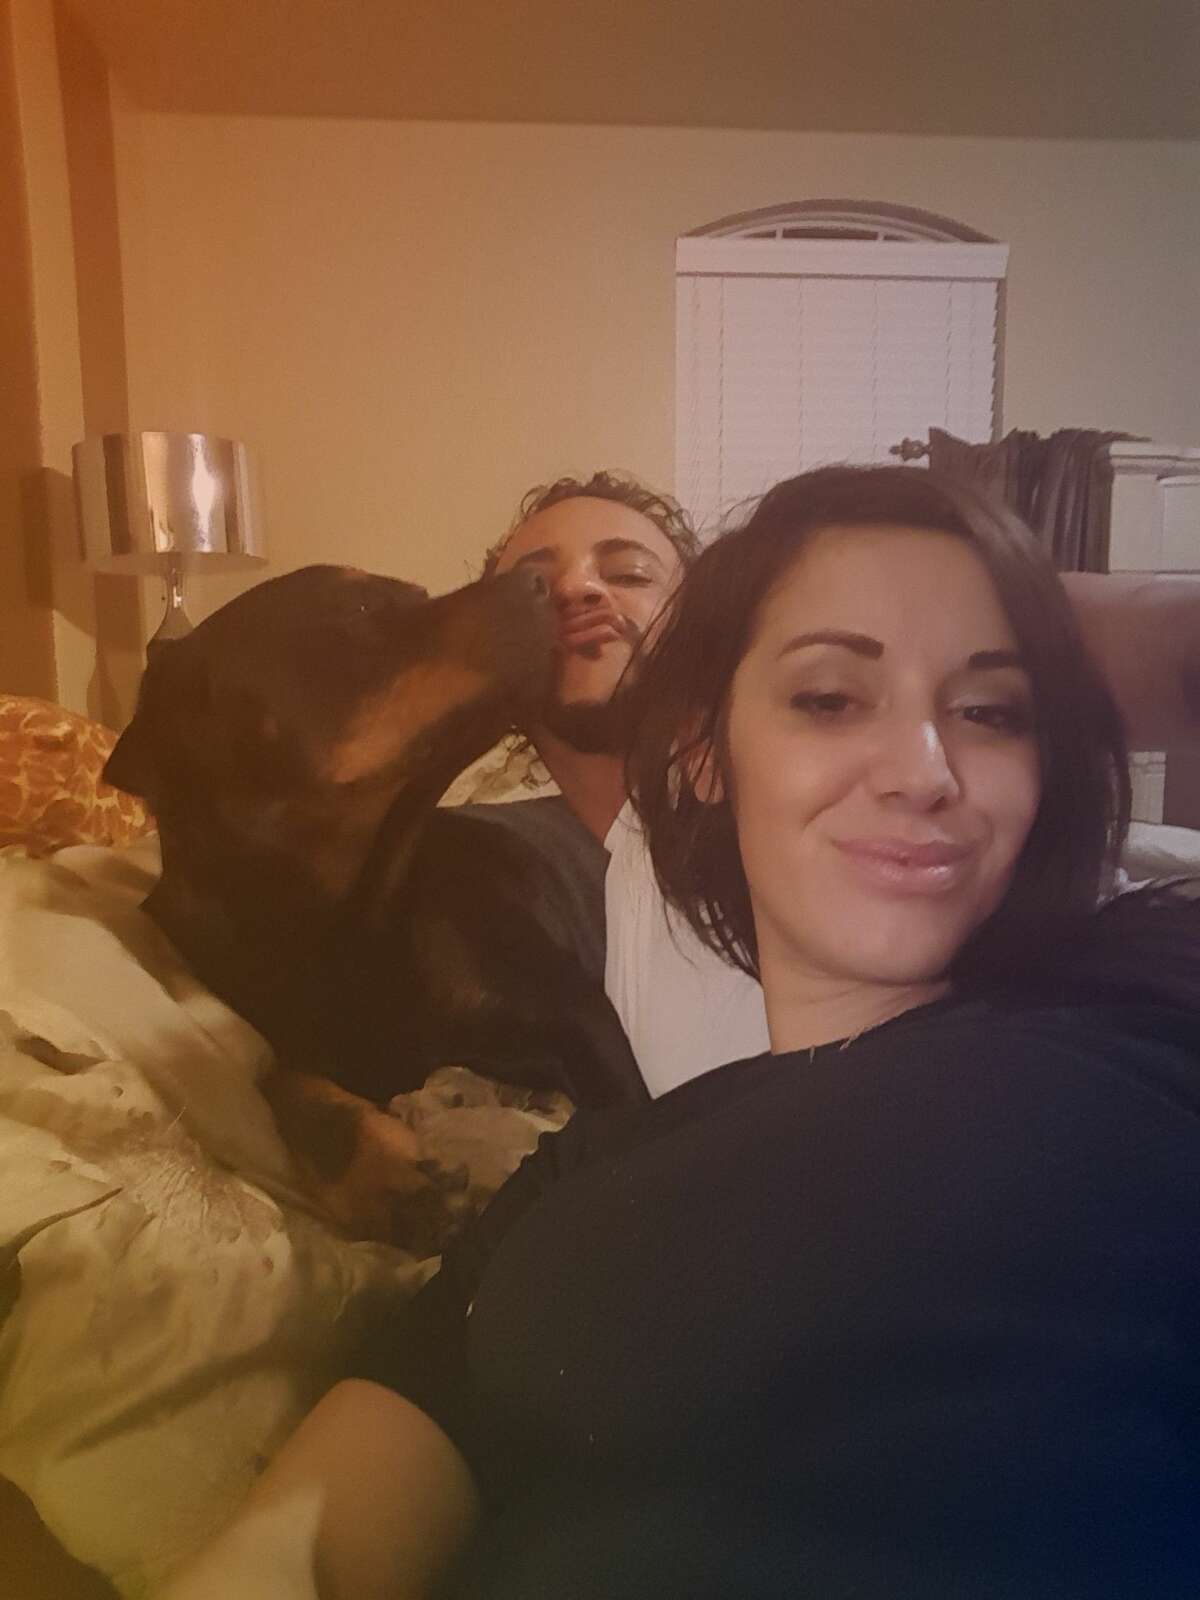 Jacqueline Culp dated Bishoy Elkhaliny (in background with his rottweiller) for 4 months in 2016. By the end of the relationship, she was left battered, bloodied and bitten after a series of assaults.